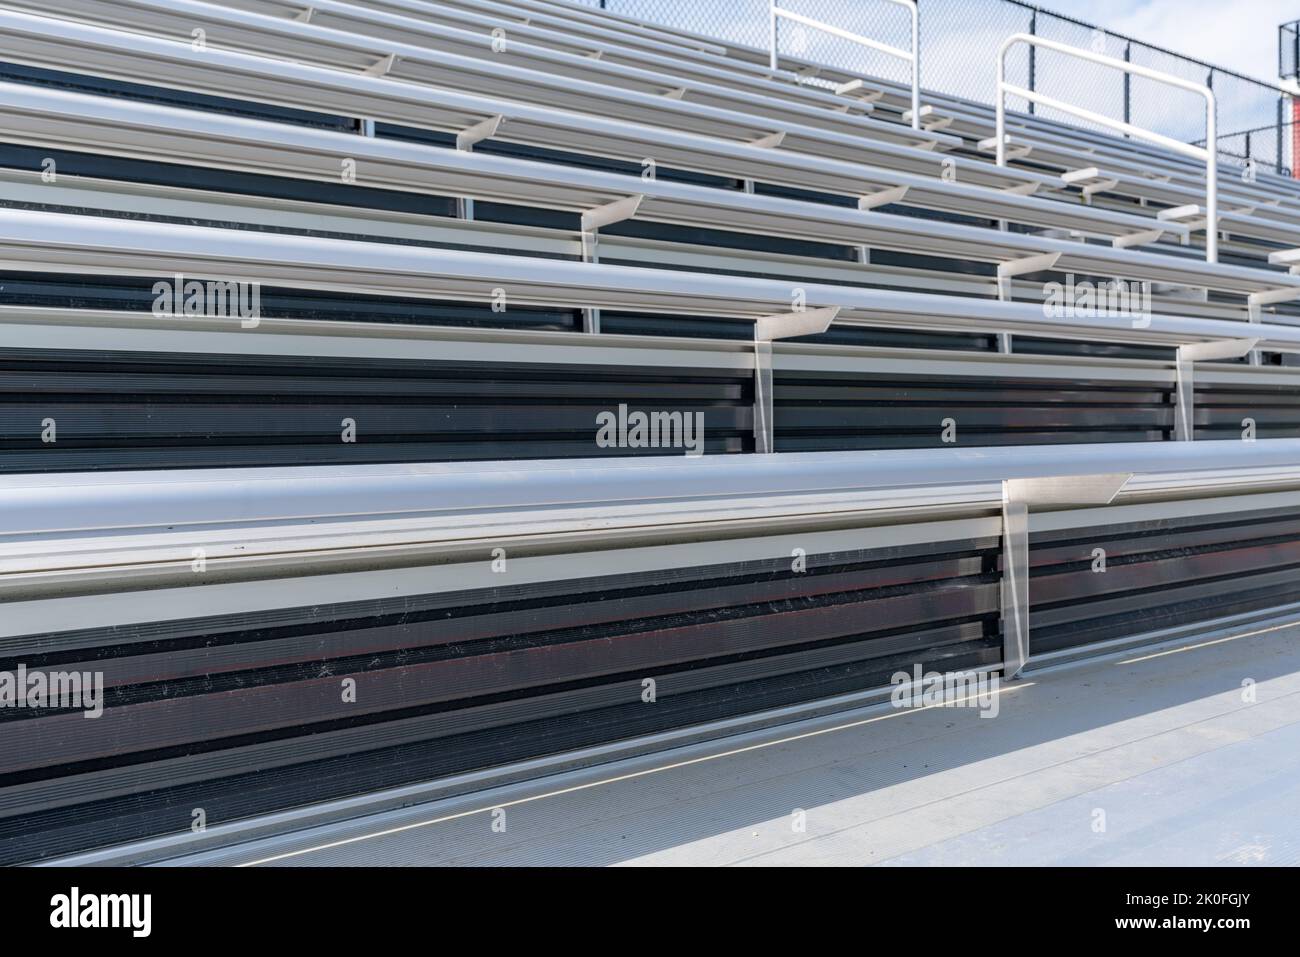 Close-Up of empty metal stadium bleacher bench seats. Nondescript location with no people in image. Not a ticketed event. Stock Photo